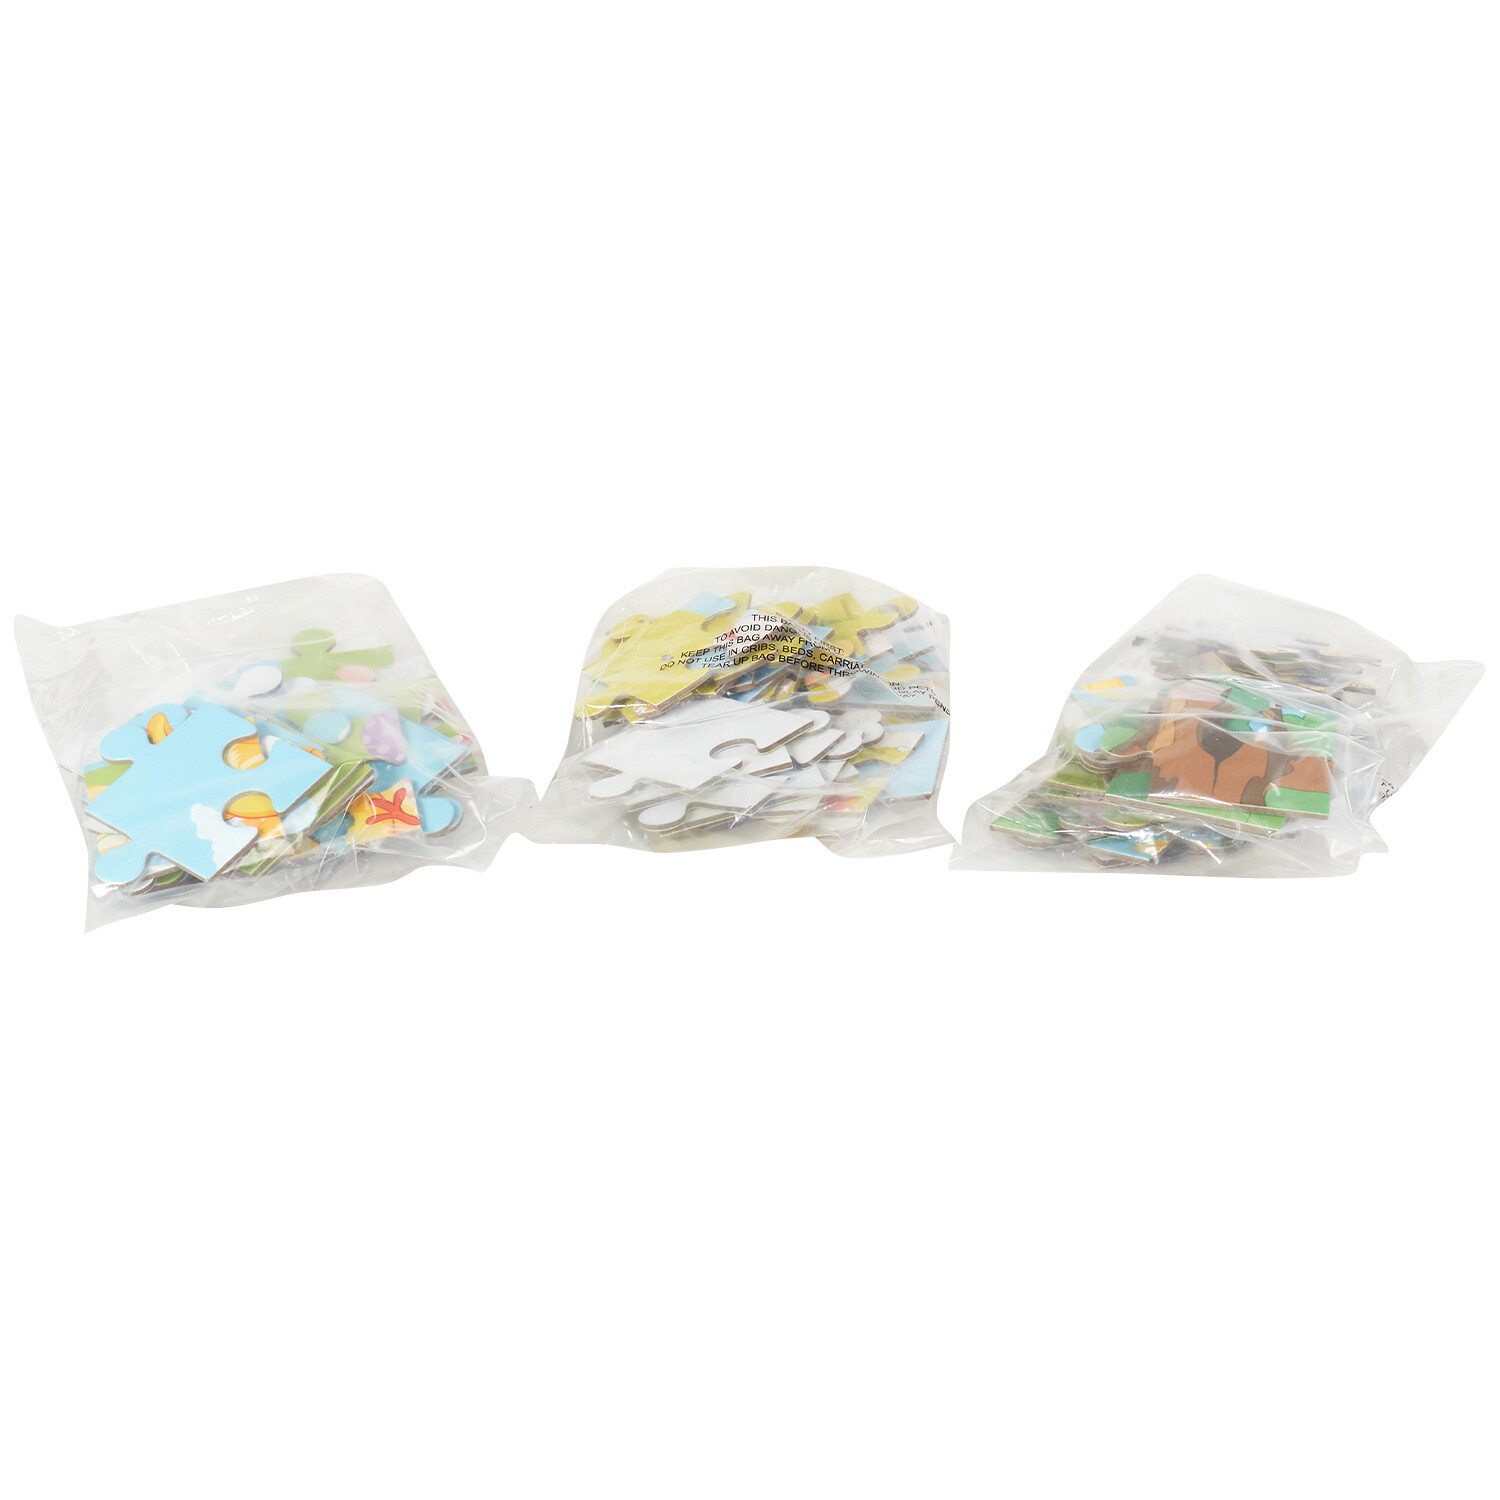 3-in-1 Easter Jigsaw Puzzle Image 4